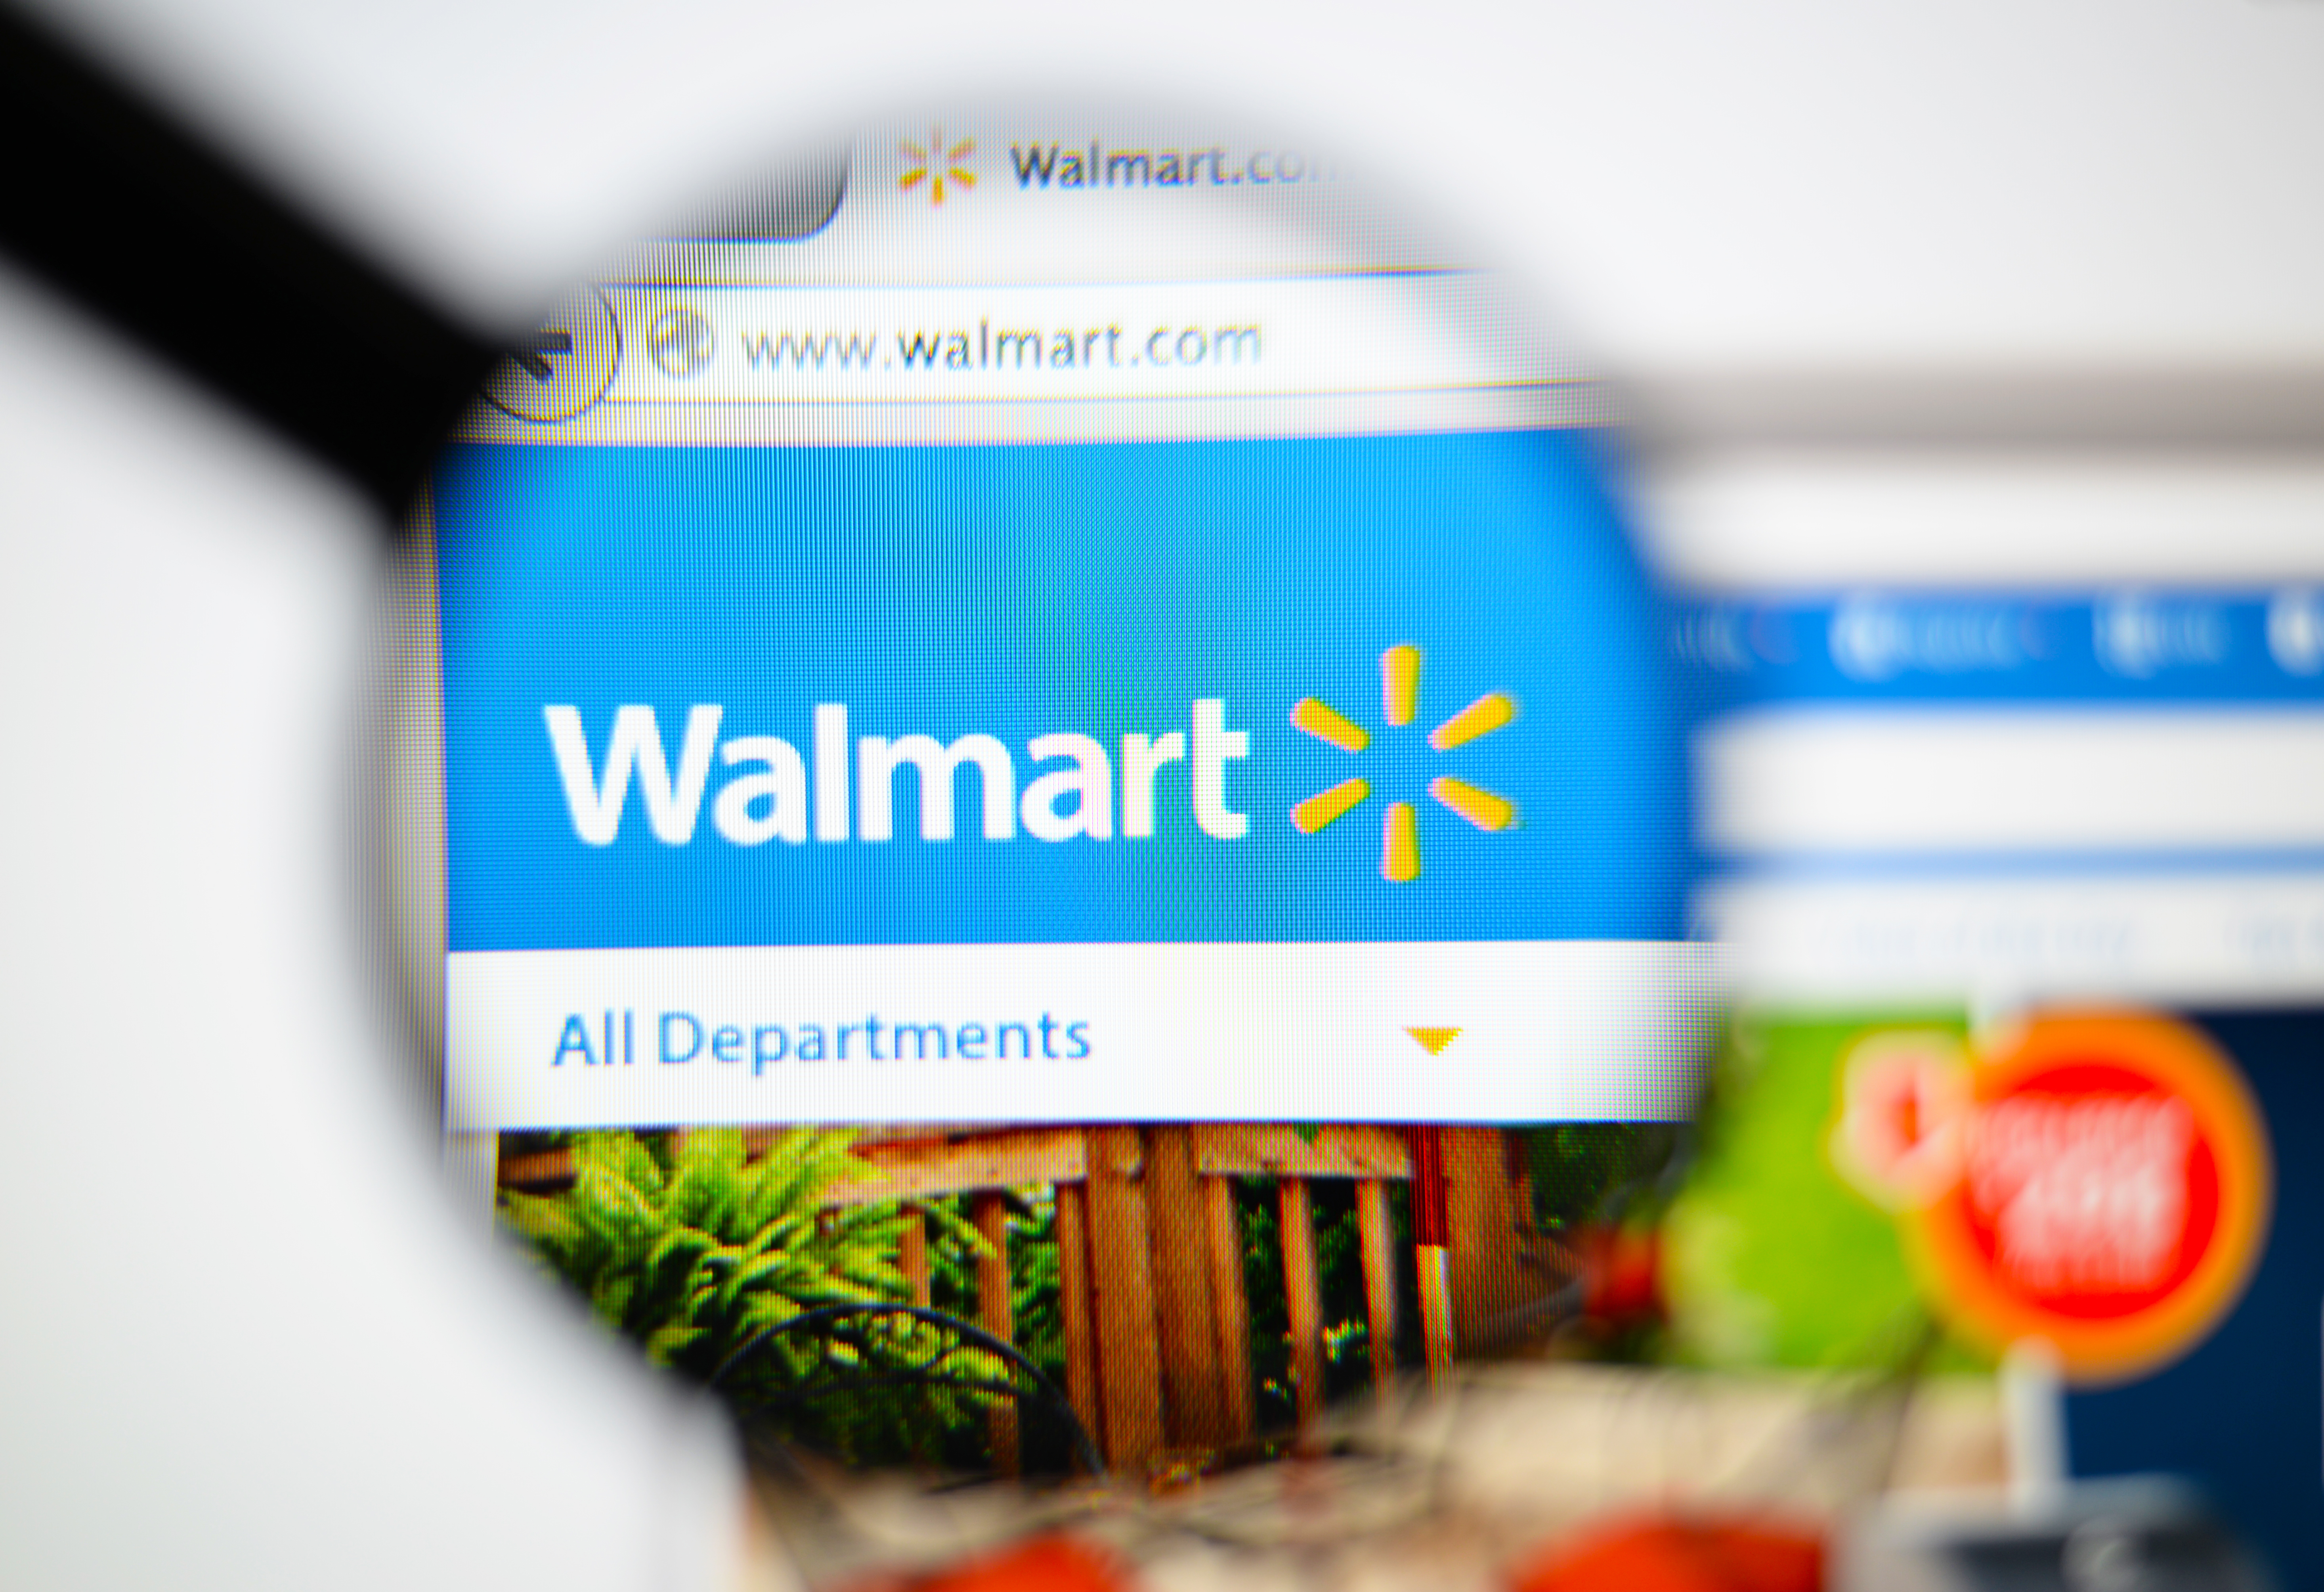 Selling on other marketplaces like Walmart.com can help your brand increase its market share on ecommerce.